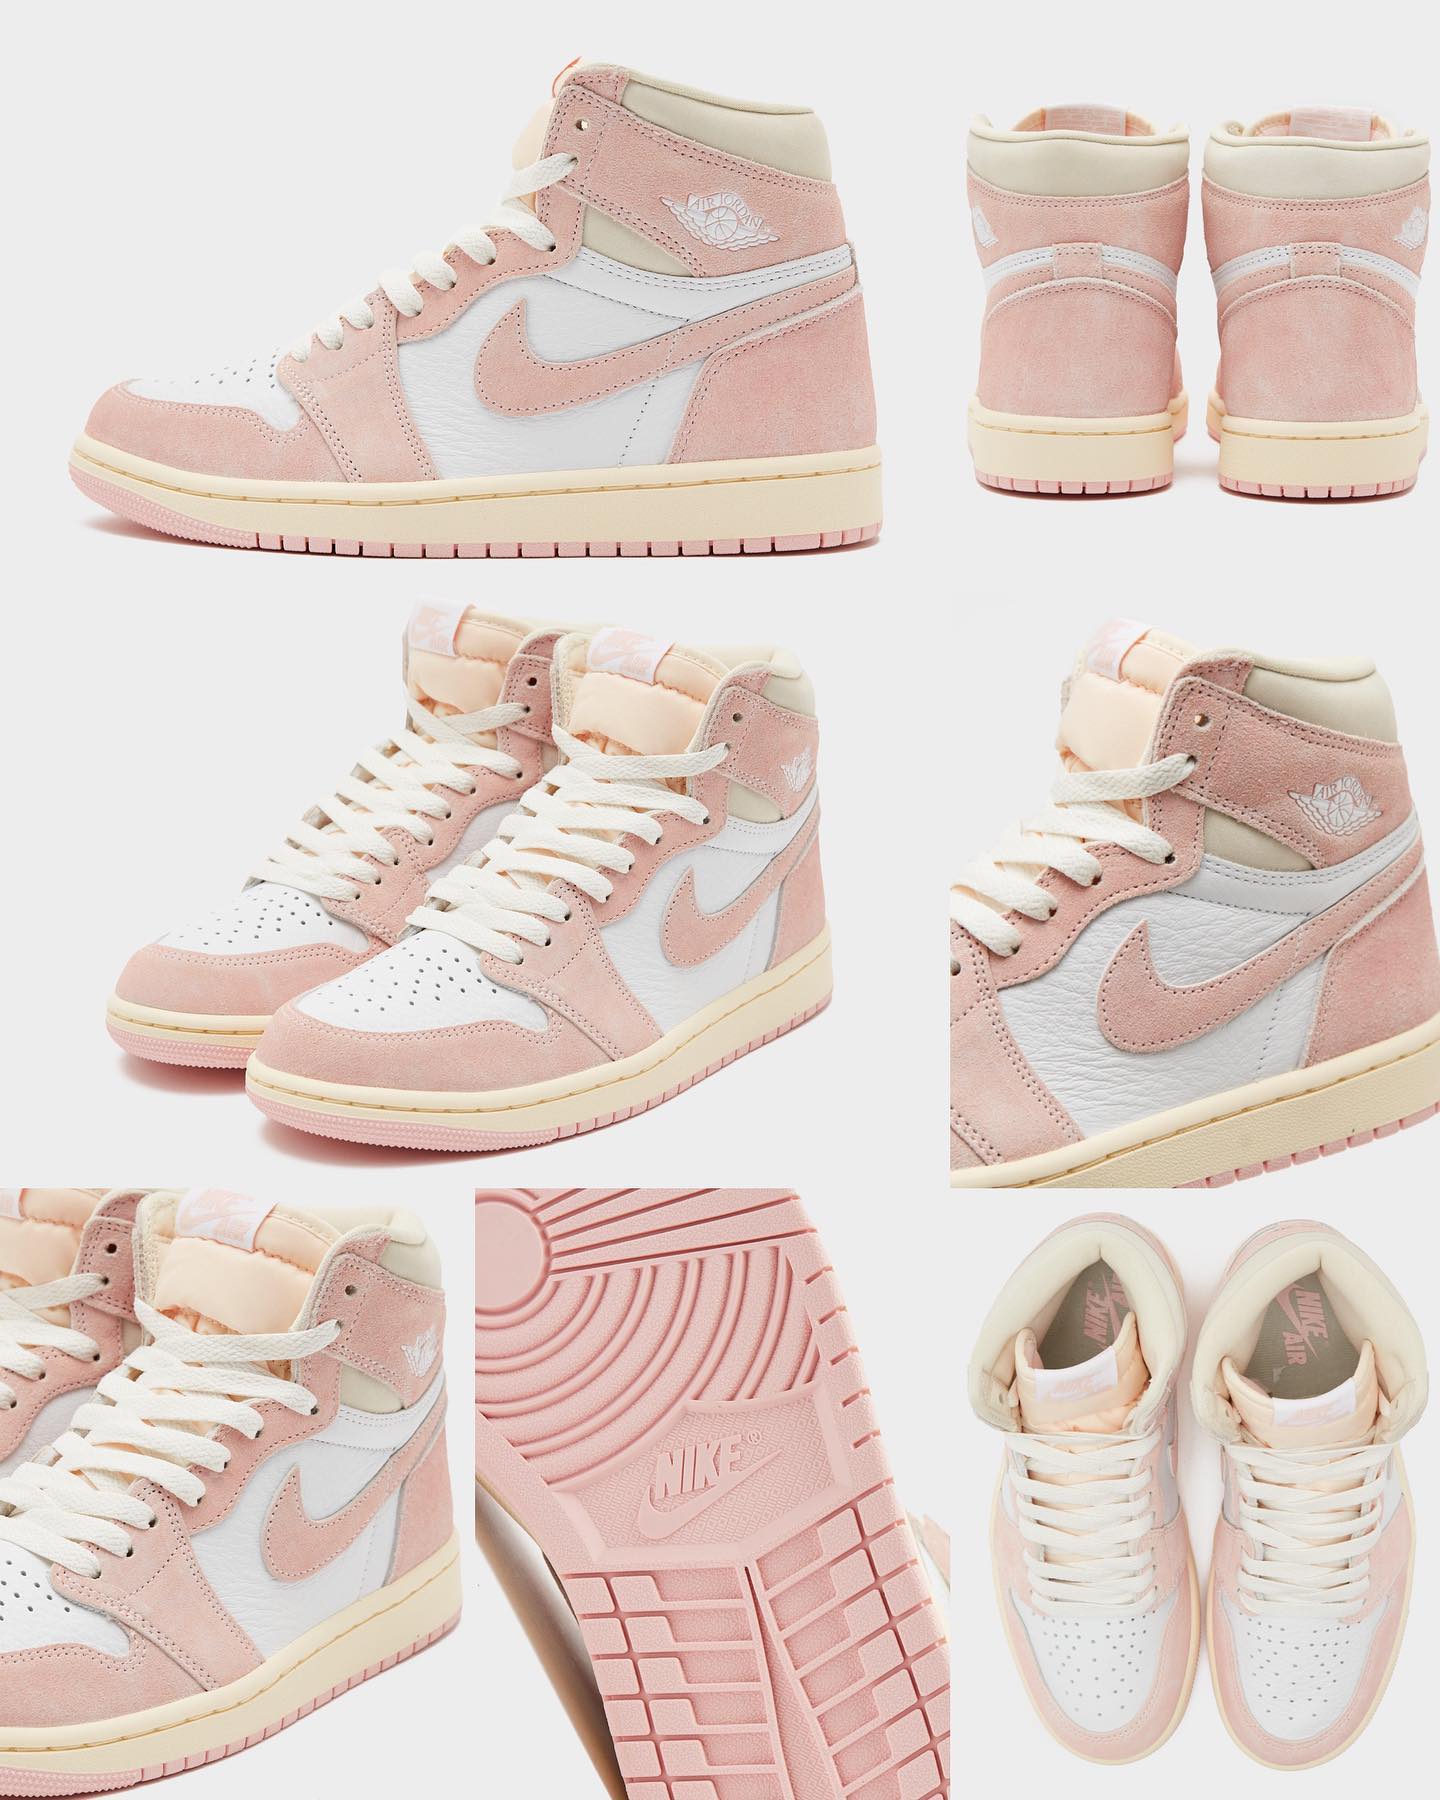 Washed Pink' Air Jordan 1 High Releases This Month | Complex